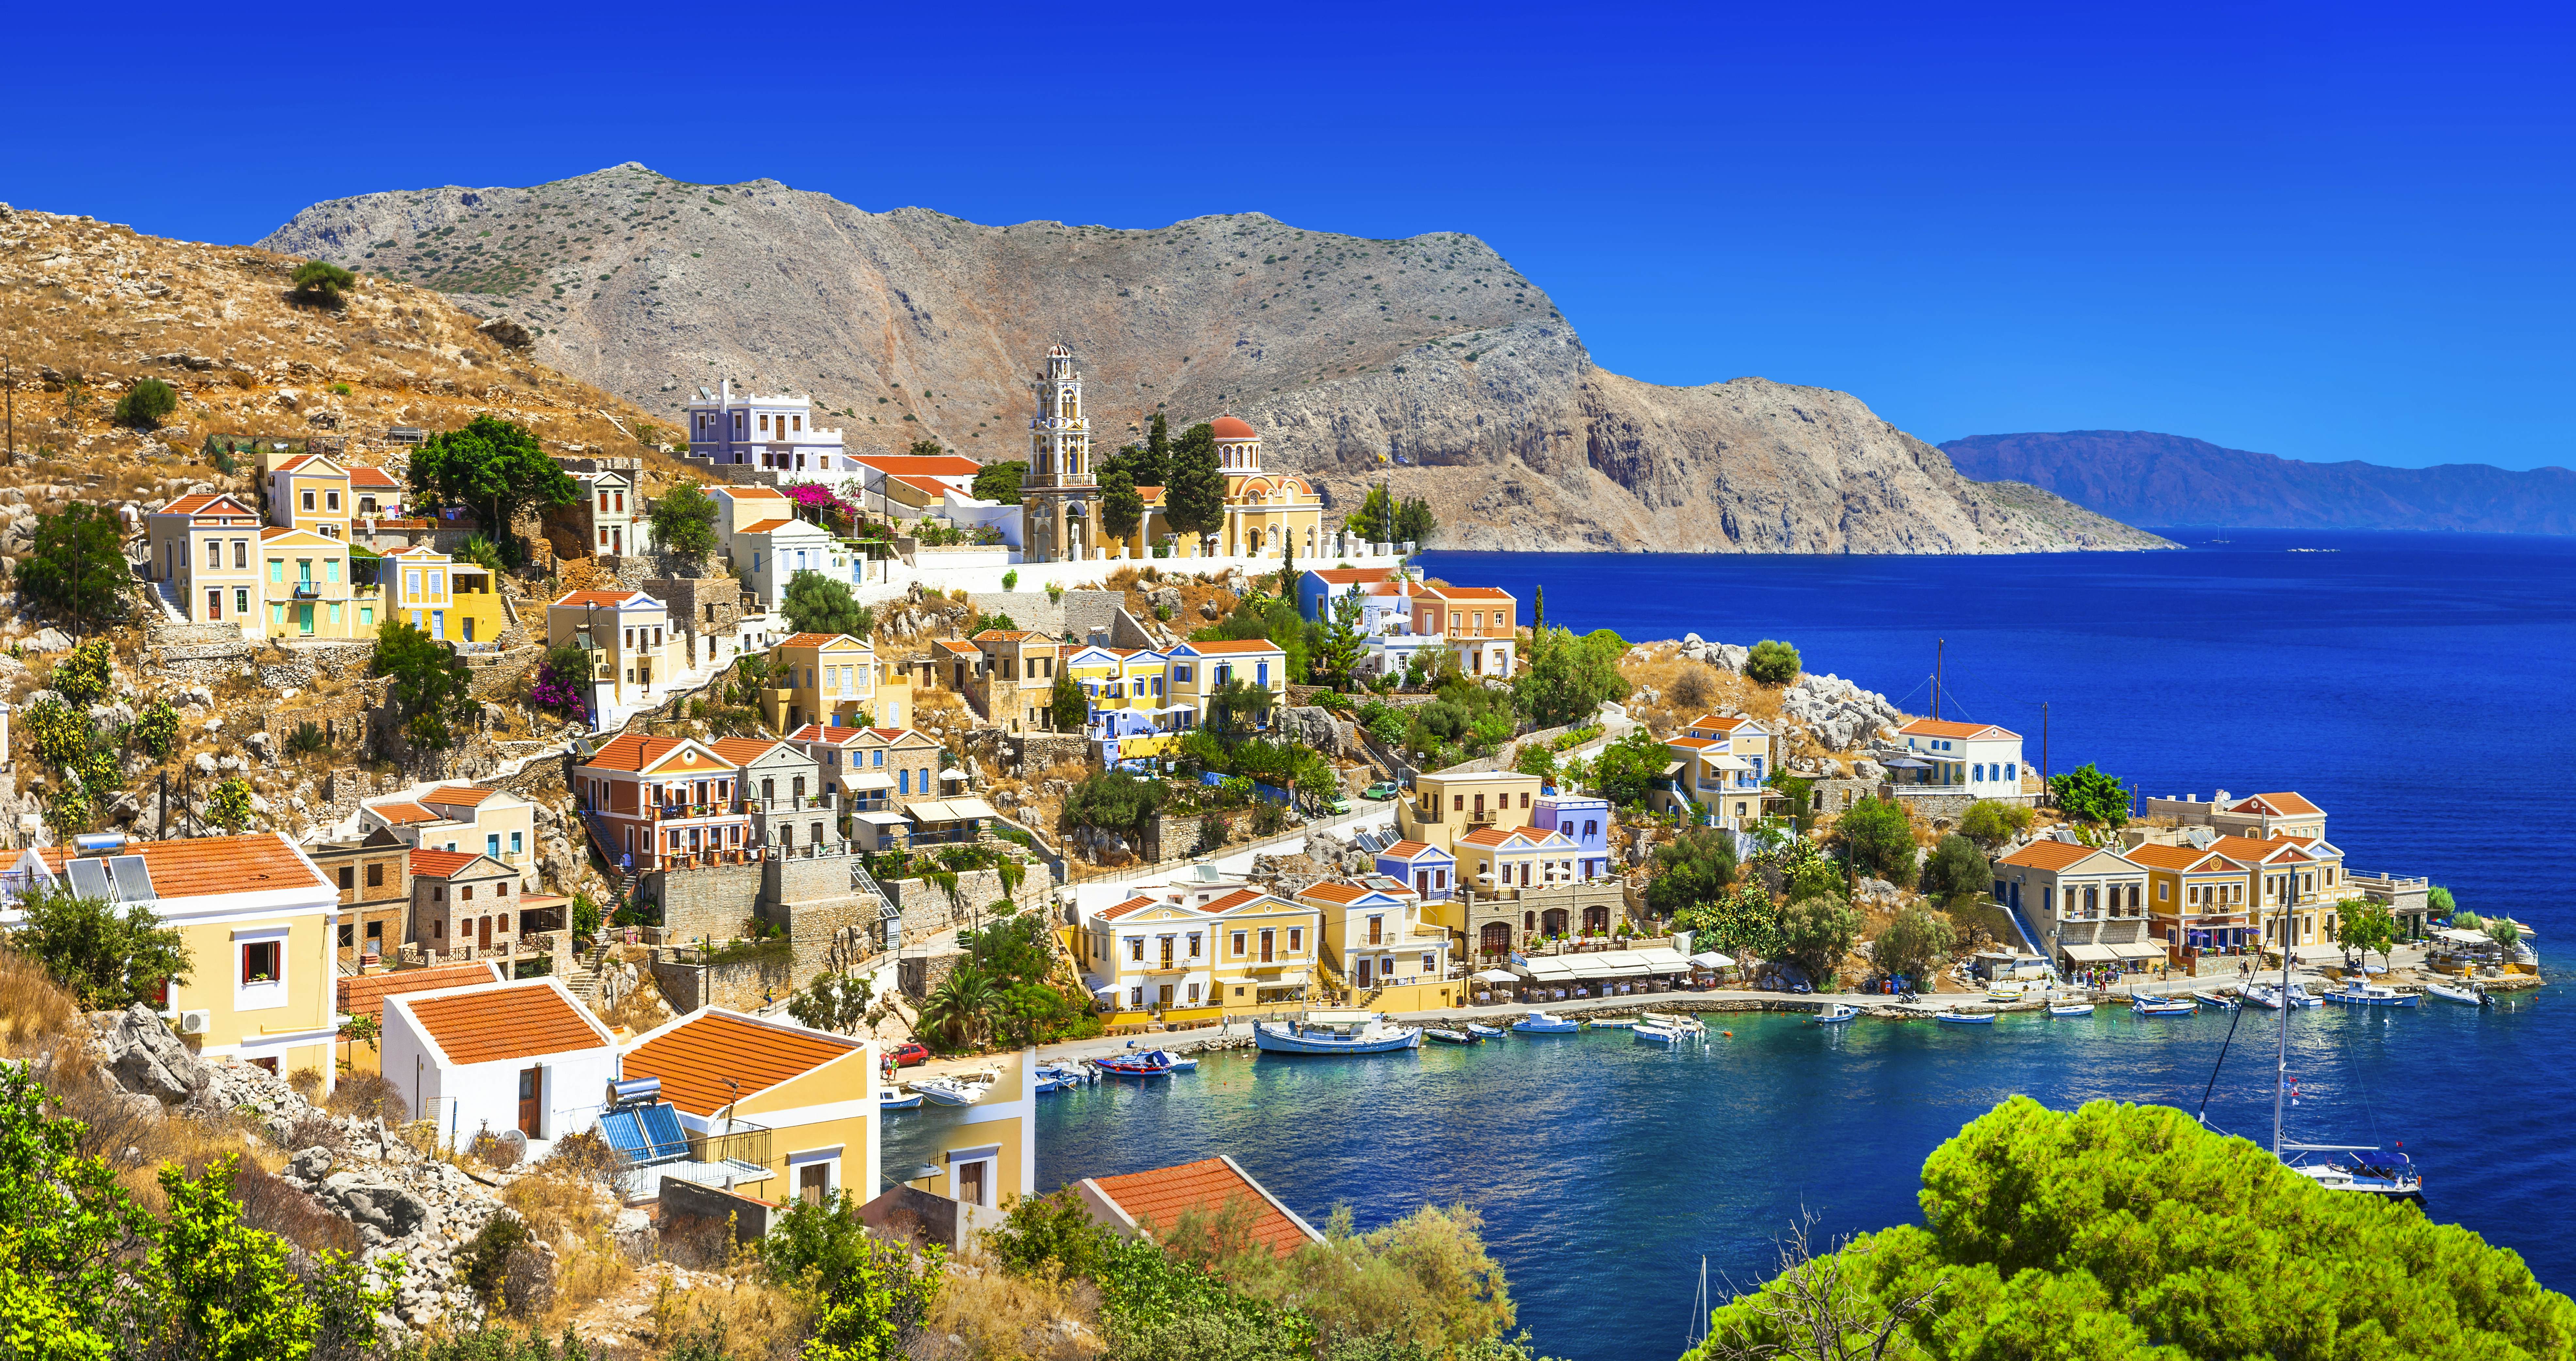 Americans Can Discover This Beautiful Mediterranean Island On